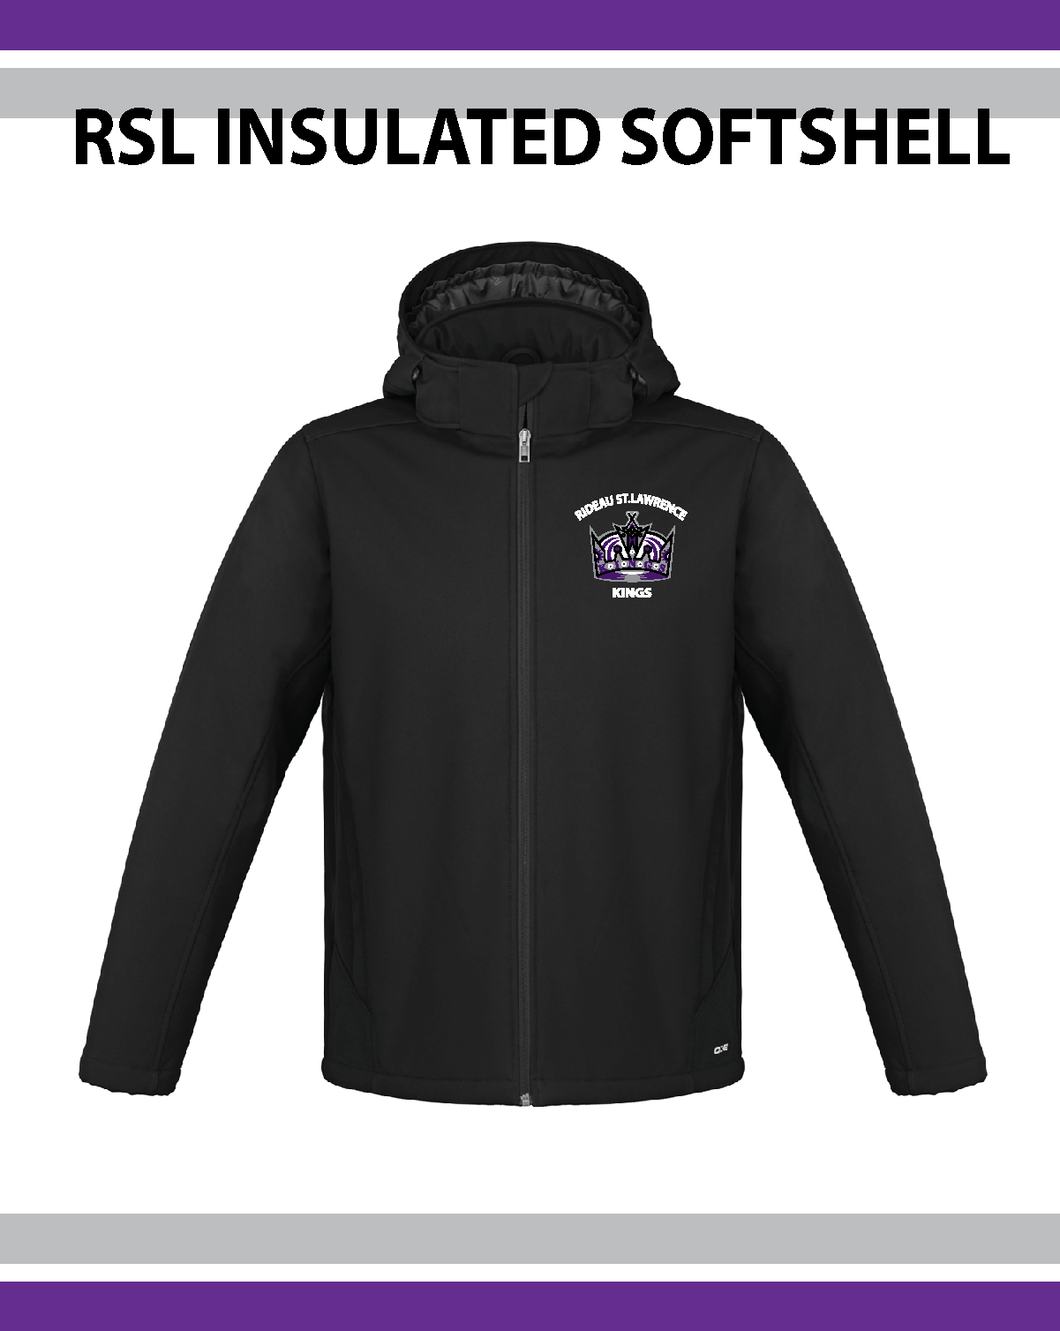 CLEARANCE RSL Kings- Insulated Softshell Jacket